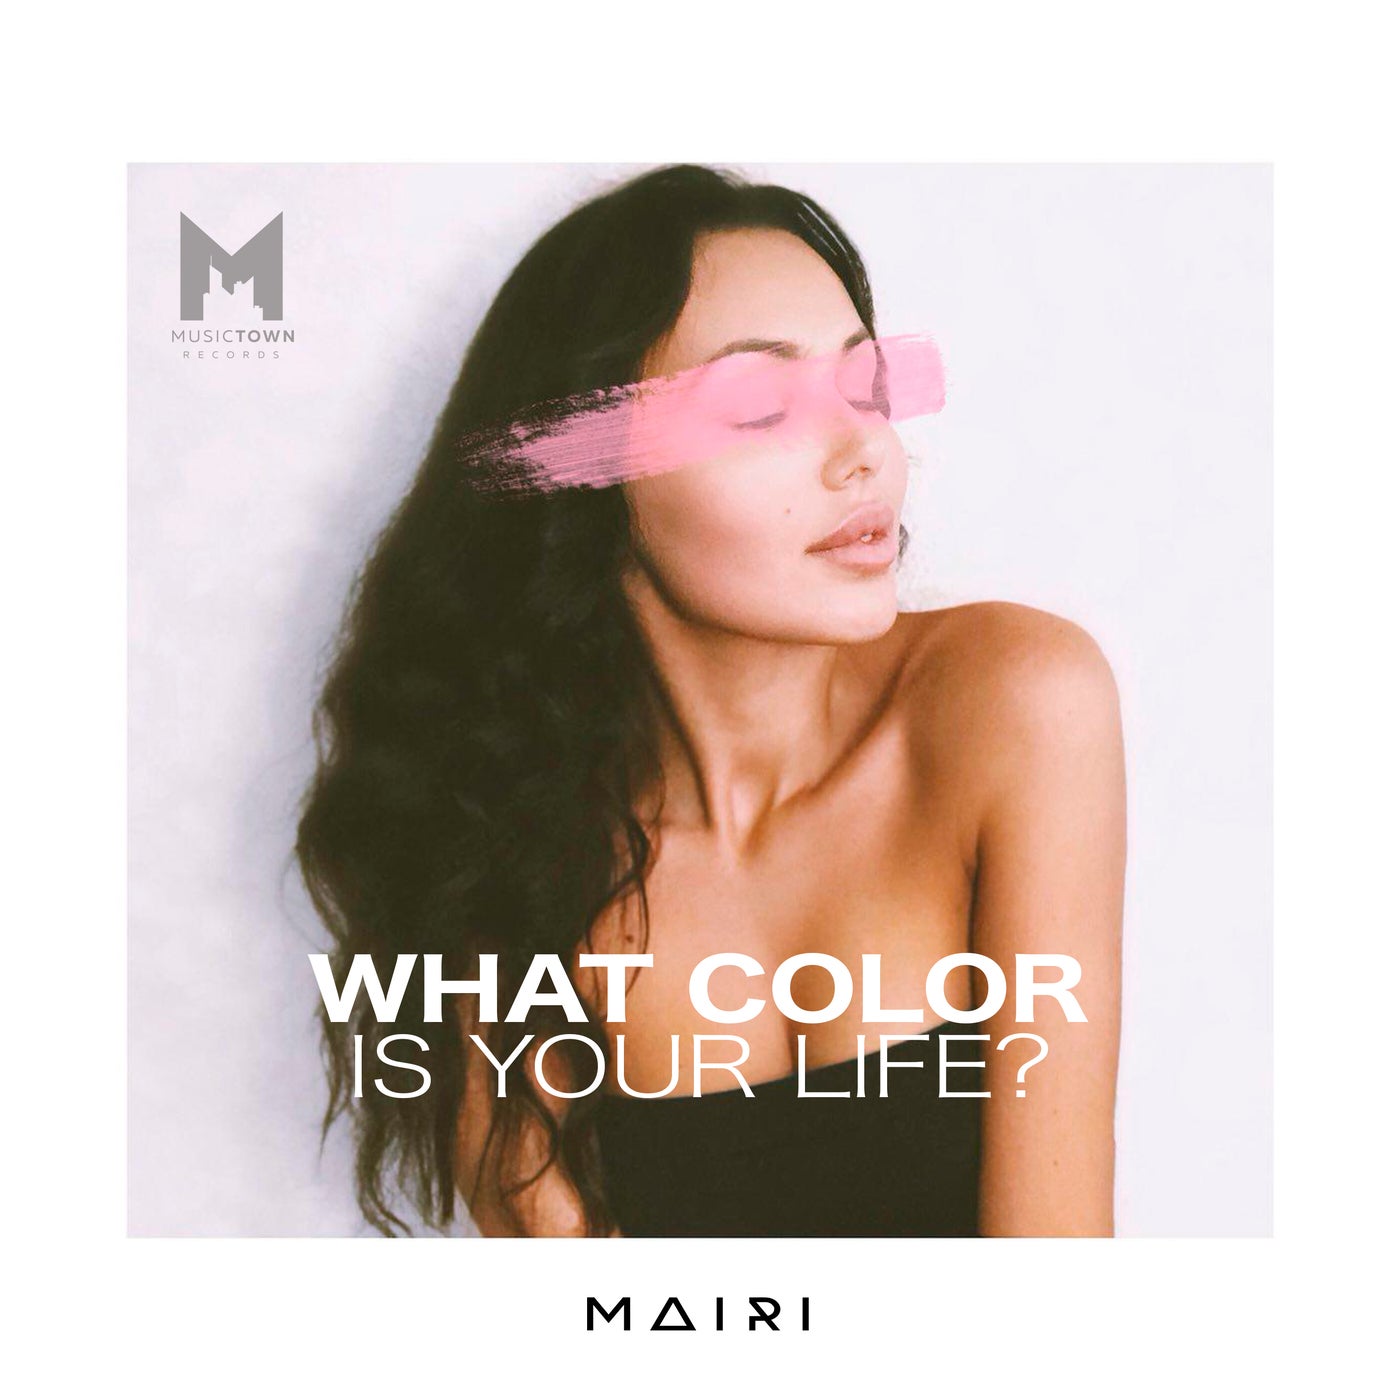 What Color Is Your Life?